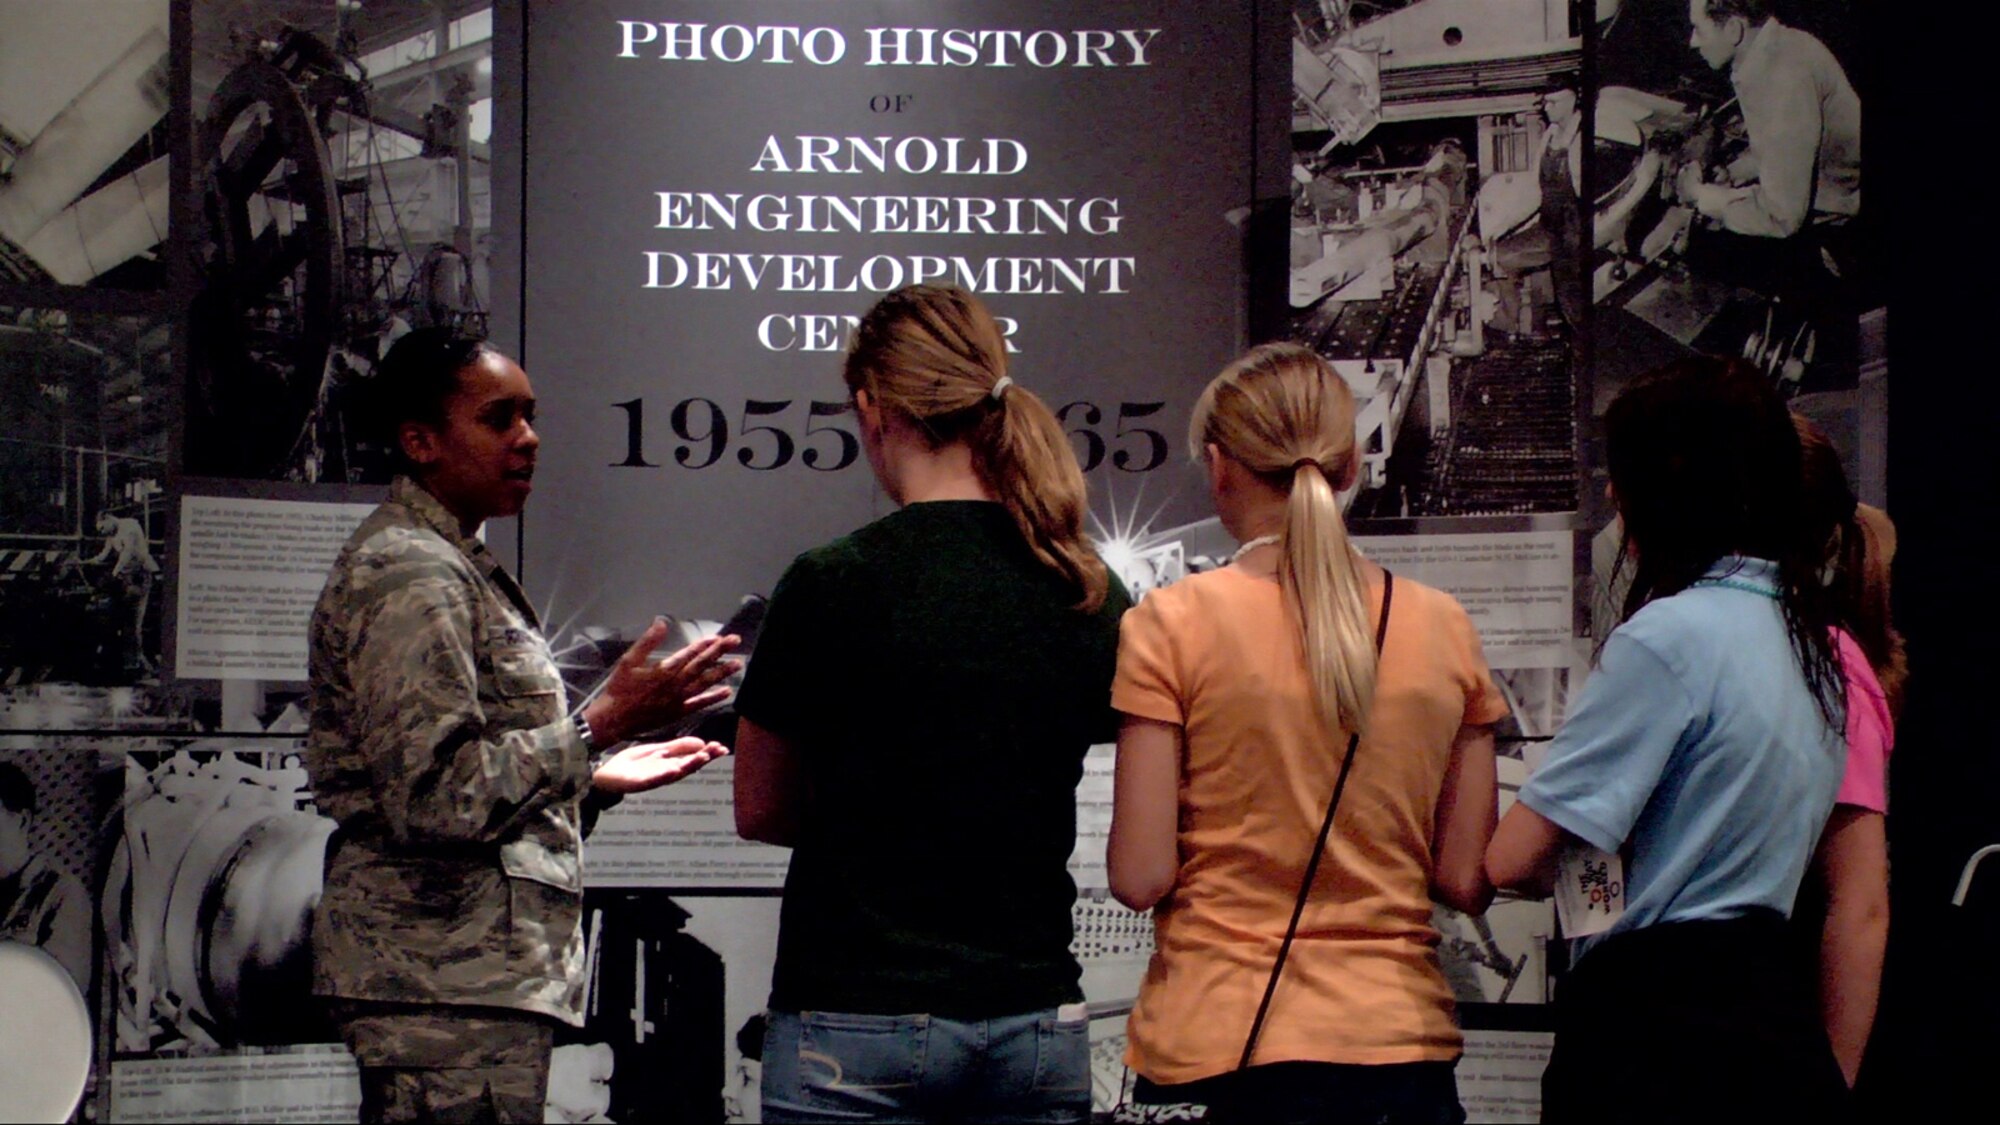 AEDC 1st Lt. Charmeeka Scroggins talks to students about the way work was done at AEDC in the 1950s and 1960s during the Smithsonian Exhibition “The Way We Worked” at the Cowan Railroad museum April 4. AEDC was one of many local landmarks featured during the exhibits visit to Cowan. (Photo by Patrick Ary)